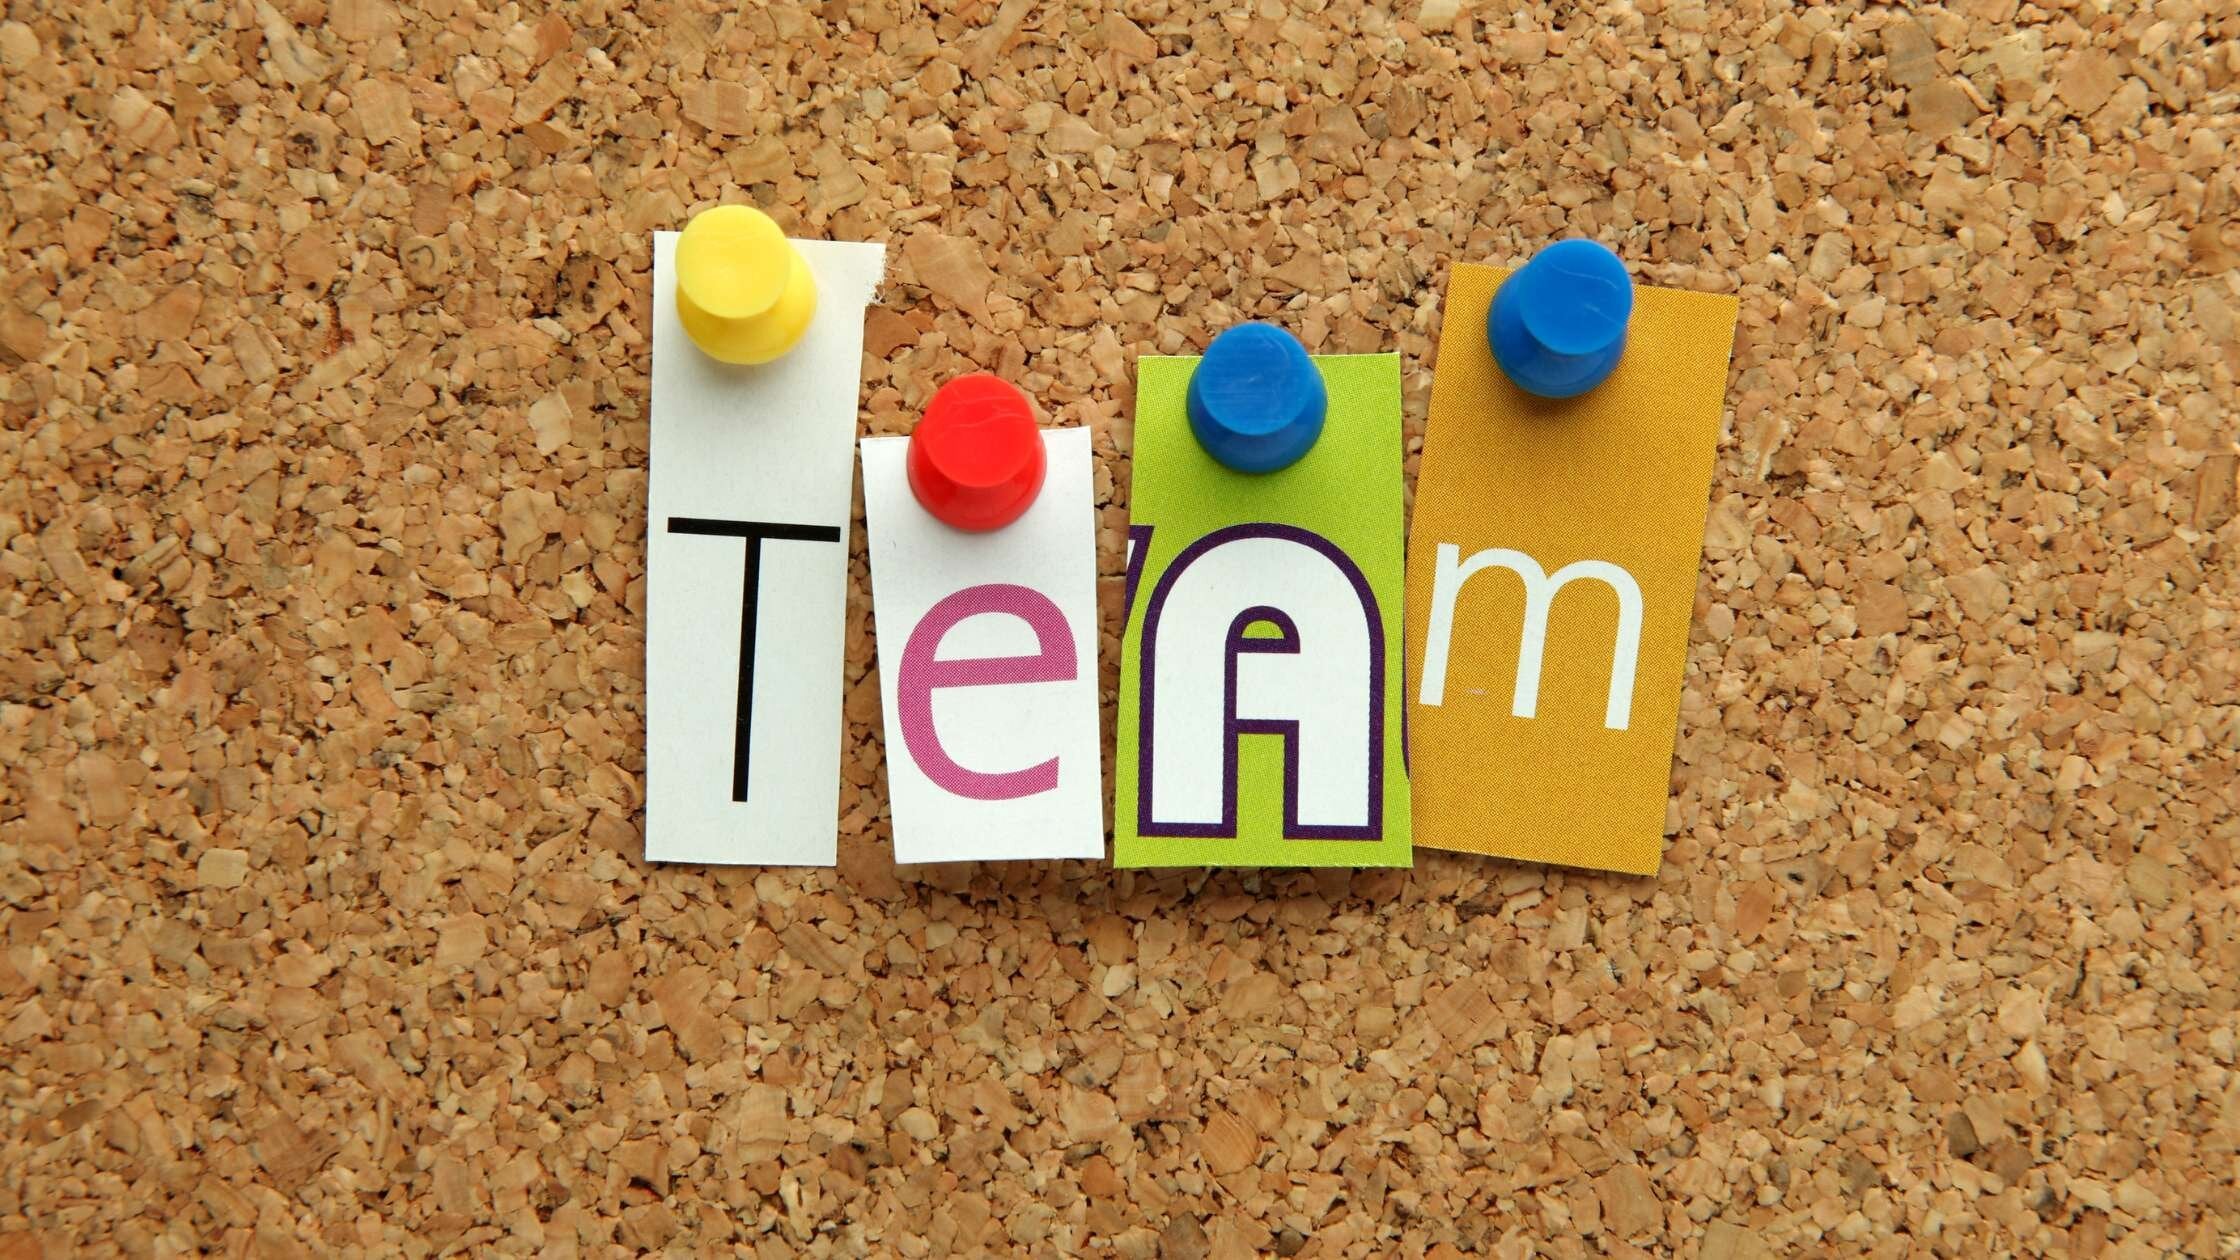 Valuable Lessons Marketing Teams Can Learn From Team Building